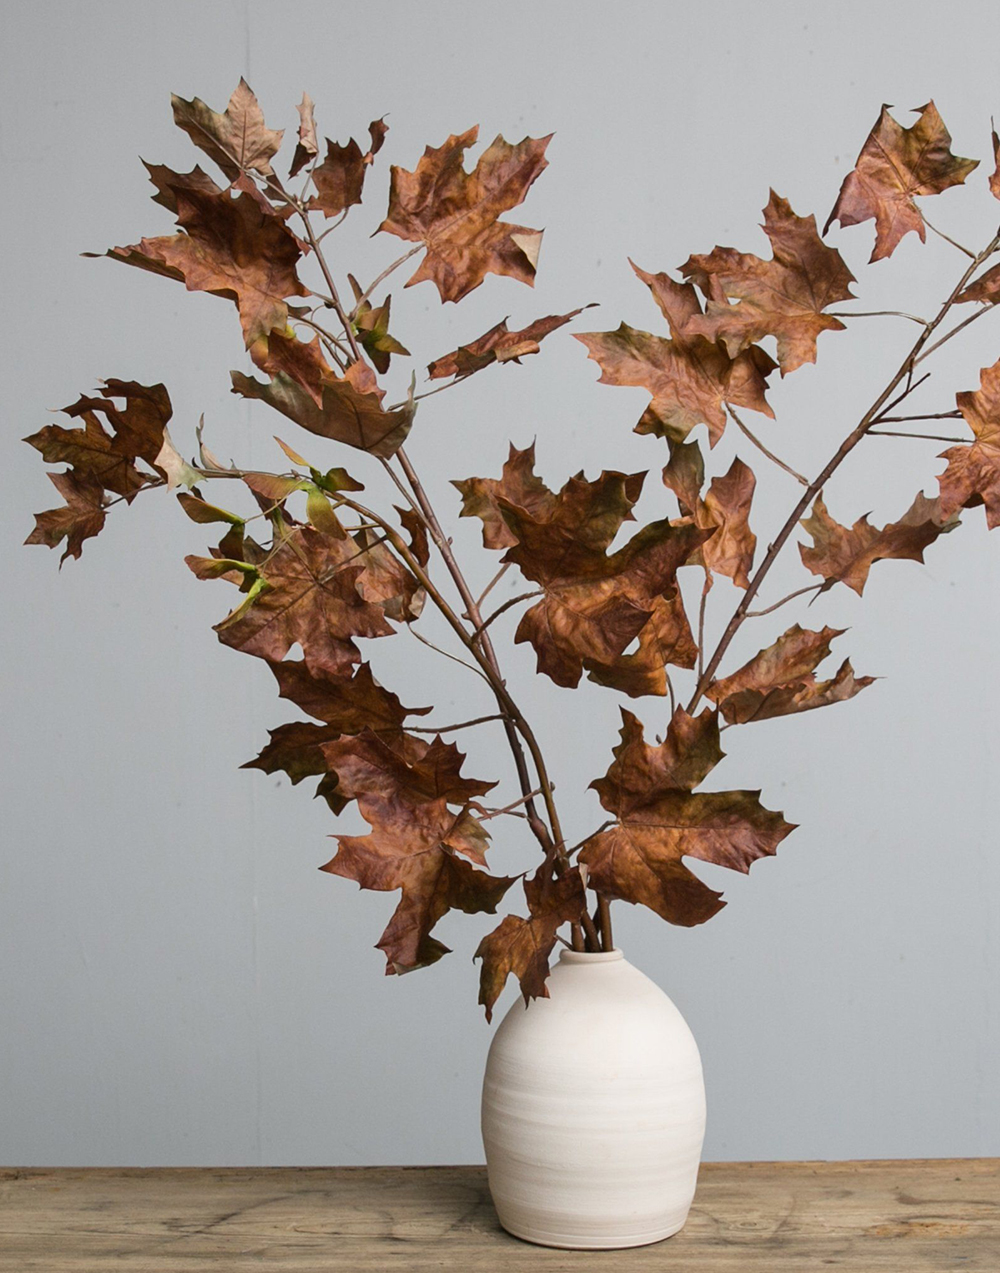 My Favorite Fall Decor Finds this Season from the Haus of Layne blog #Fall #Autumn #FallDecor #HomeDecor